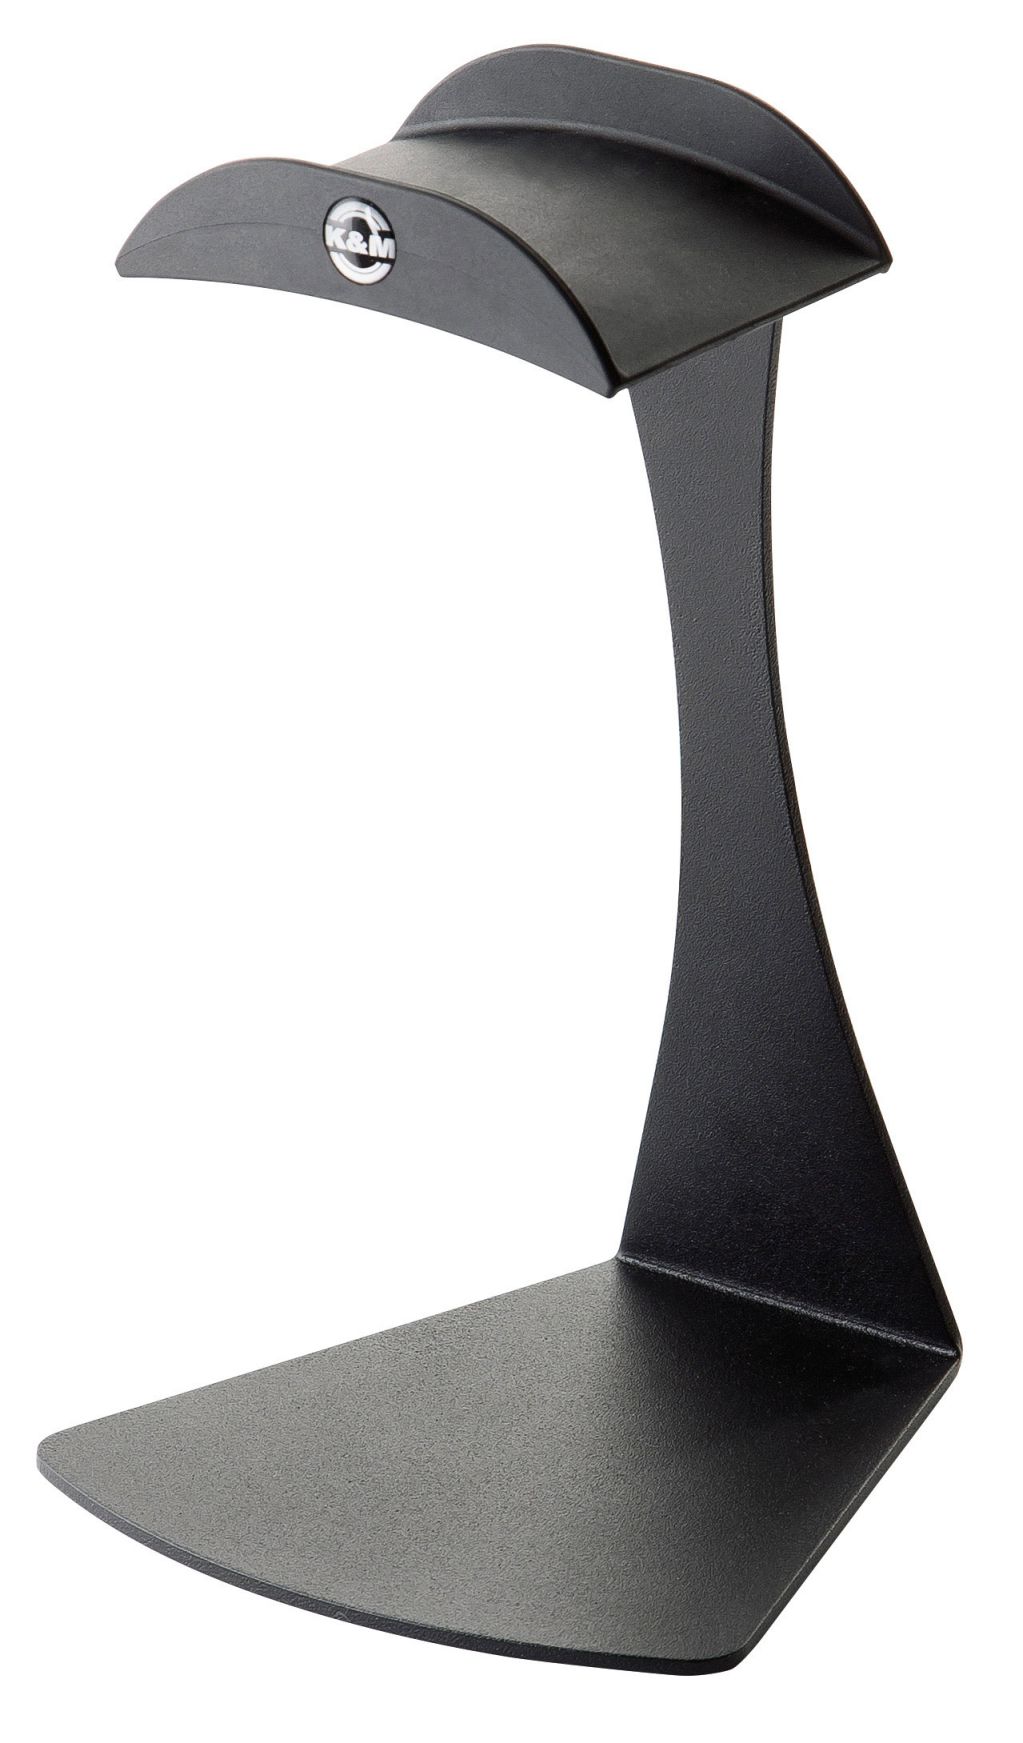 An image of K&M Headphone Table Stand | PMT Online